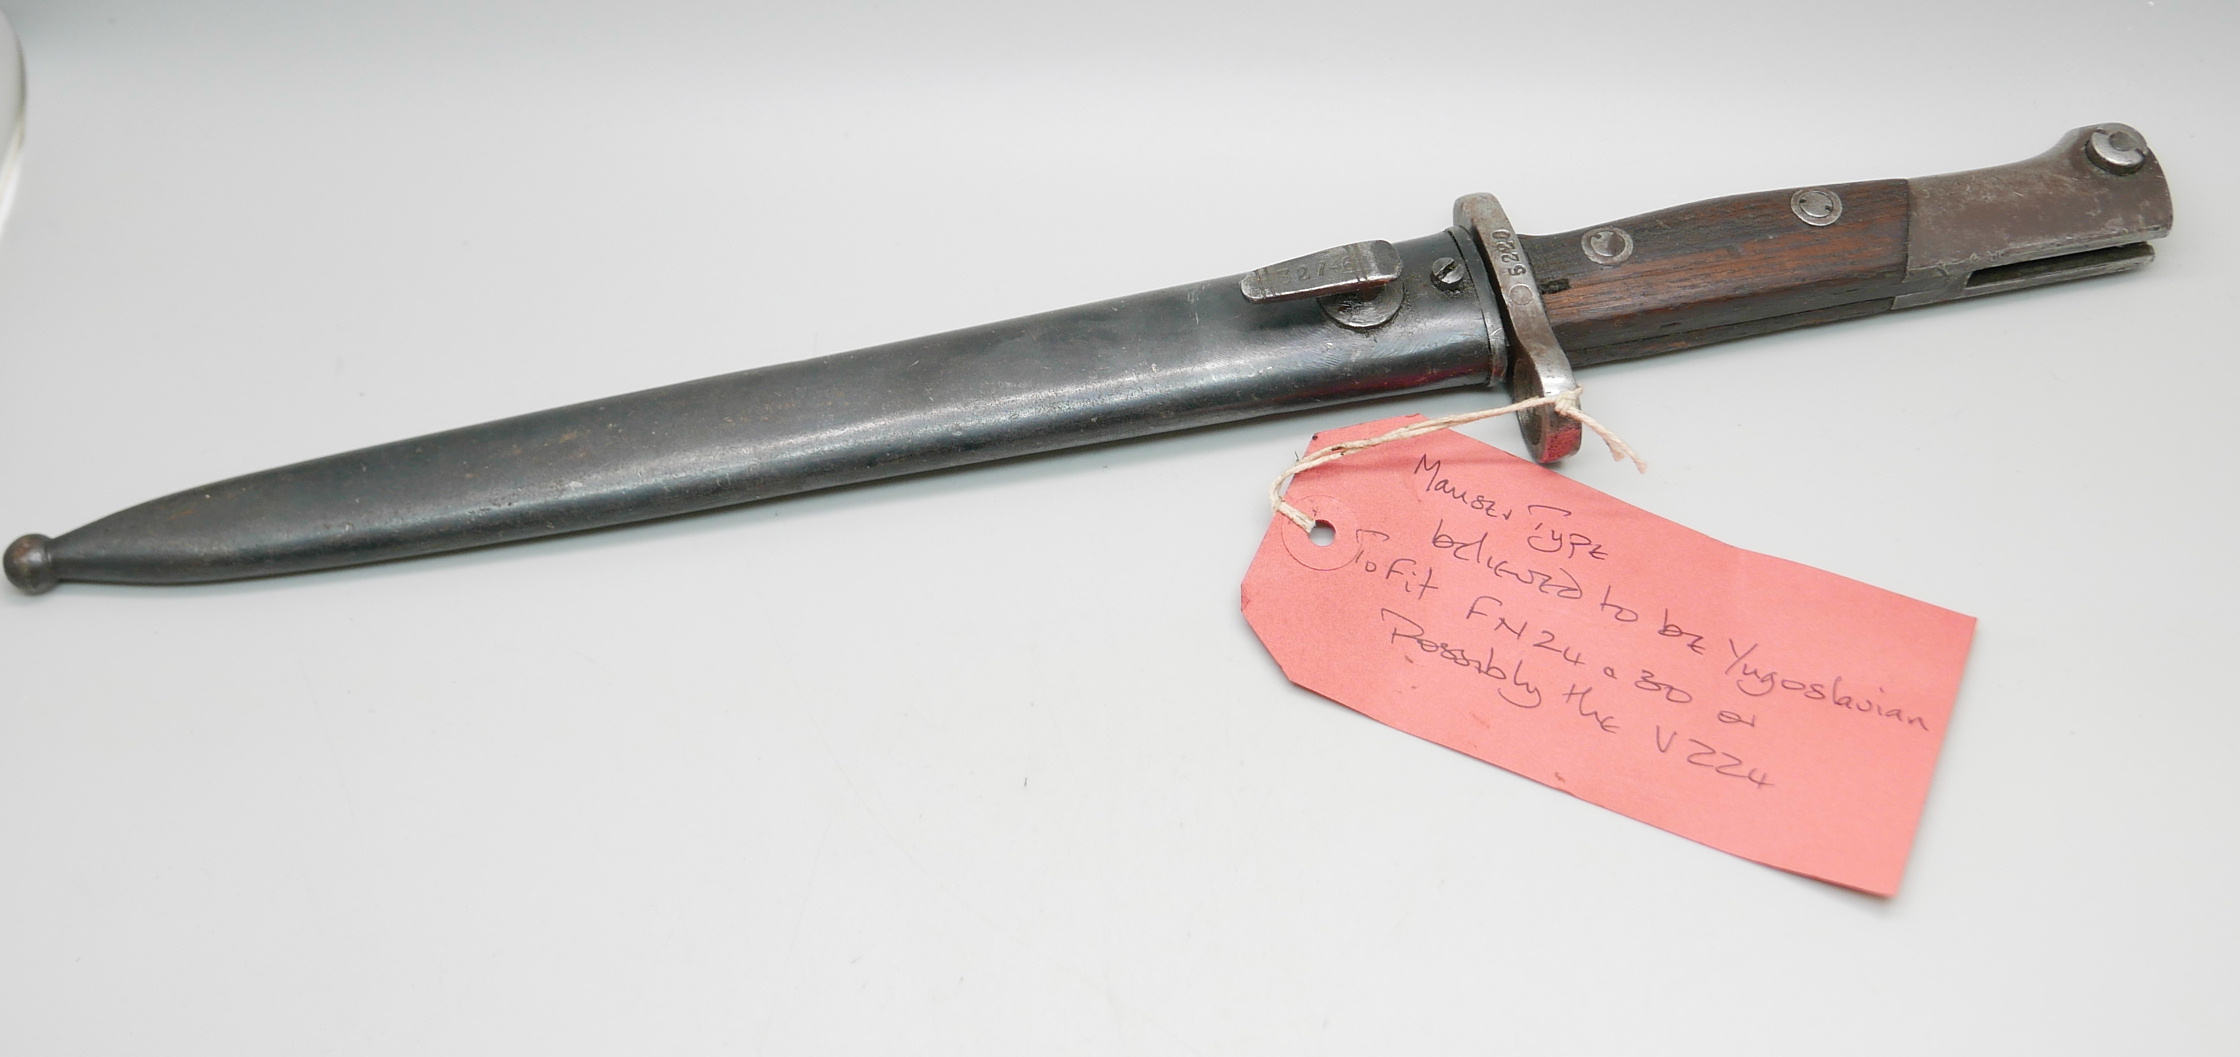 A Mauser type bayonet (believed to be Yugoslavian), to fit FN24 or 30, possibly the V224